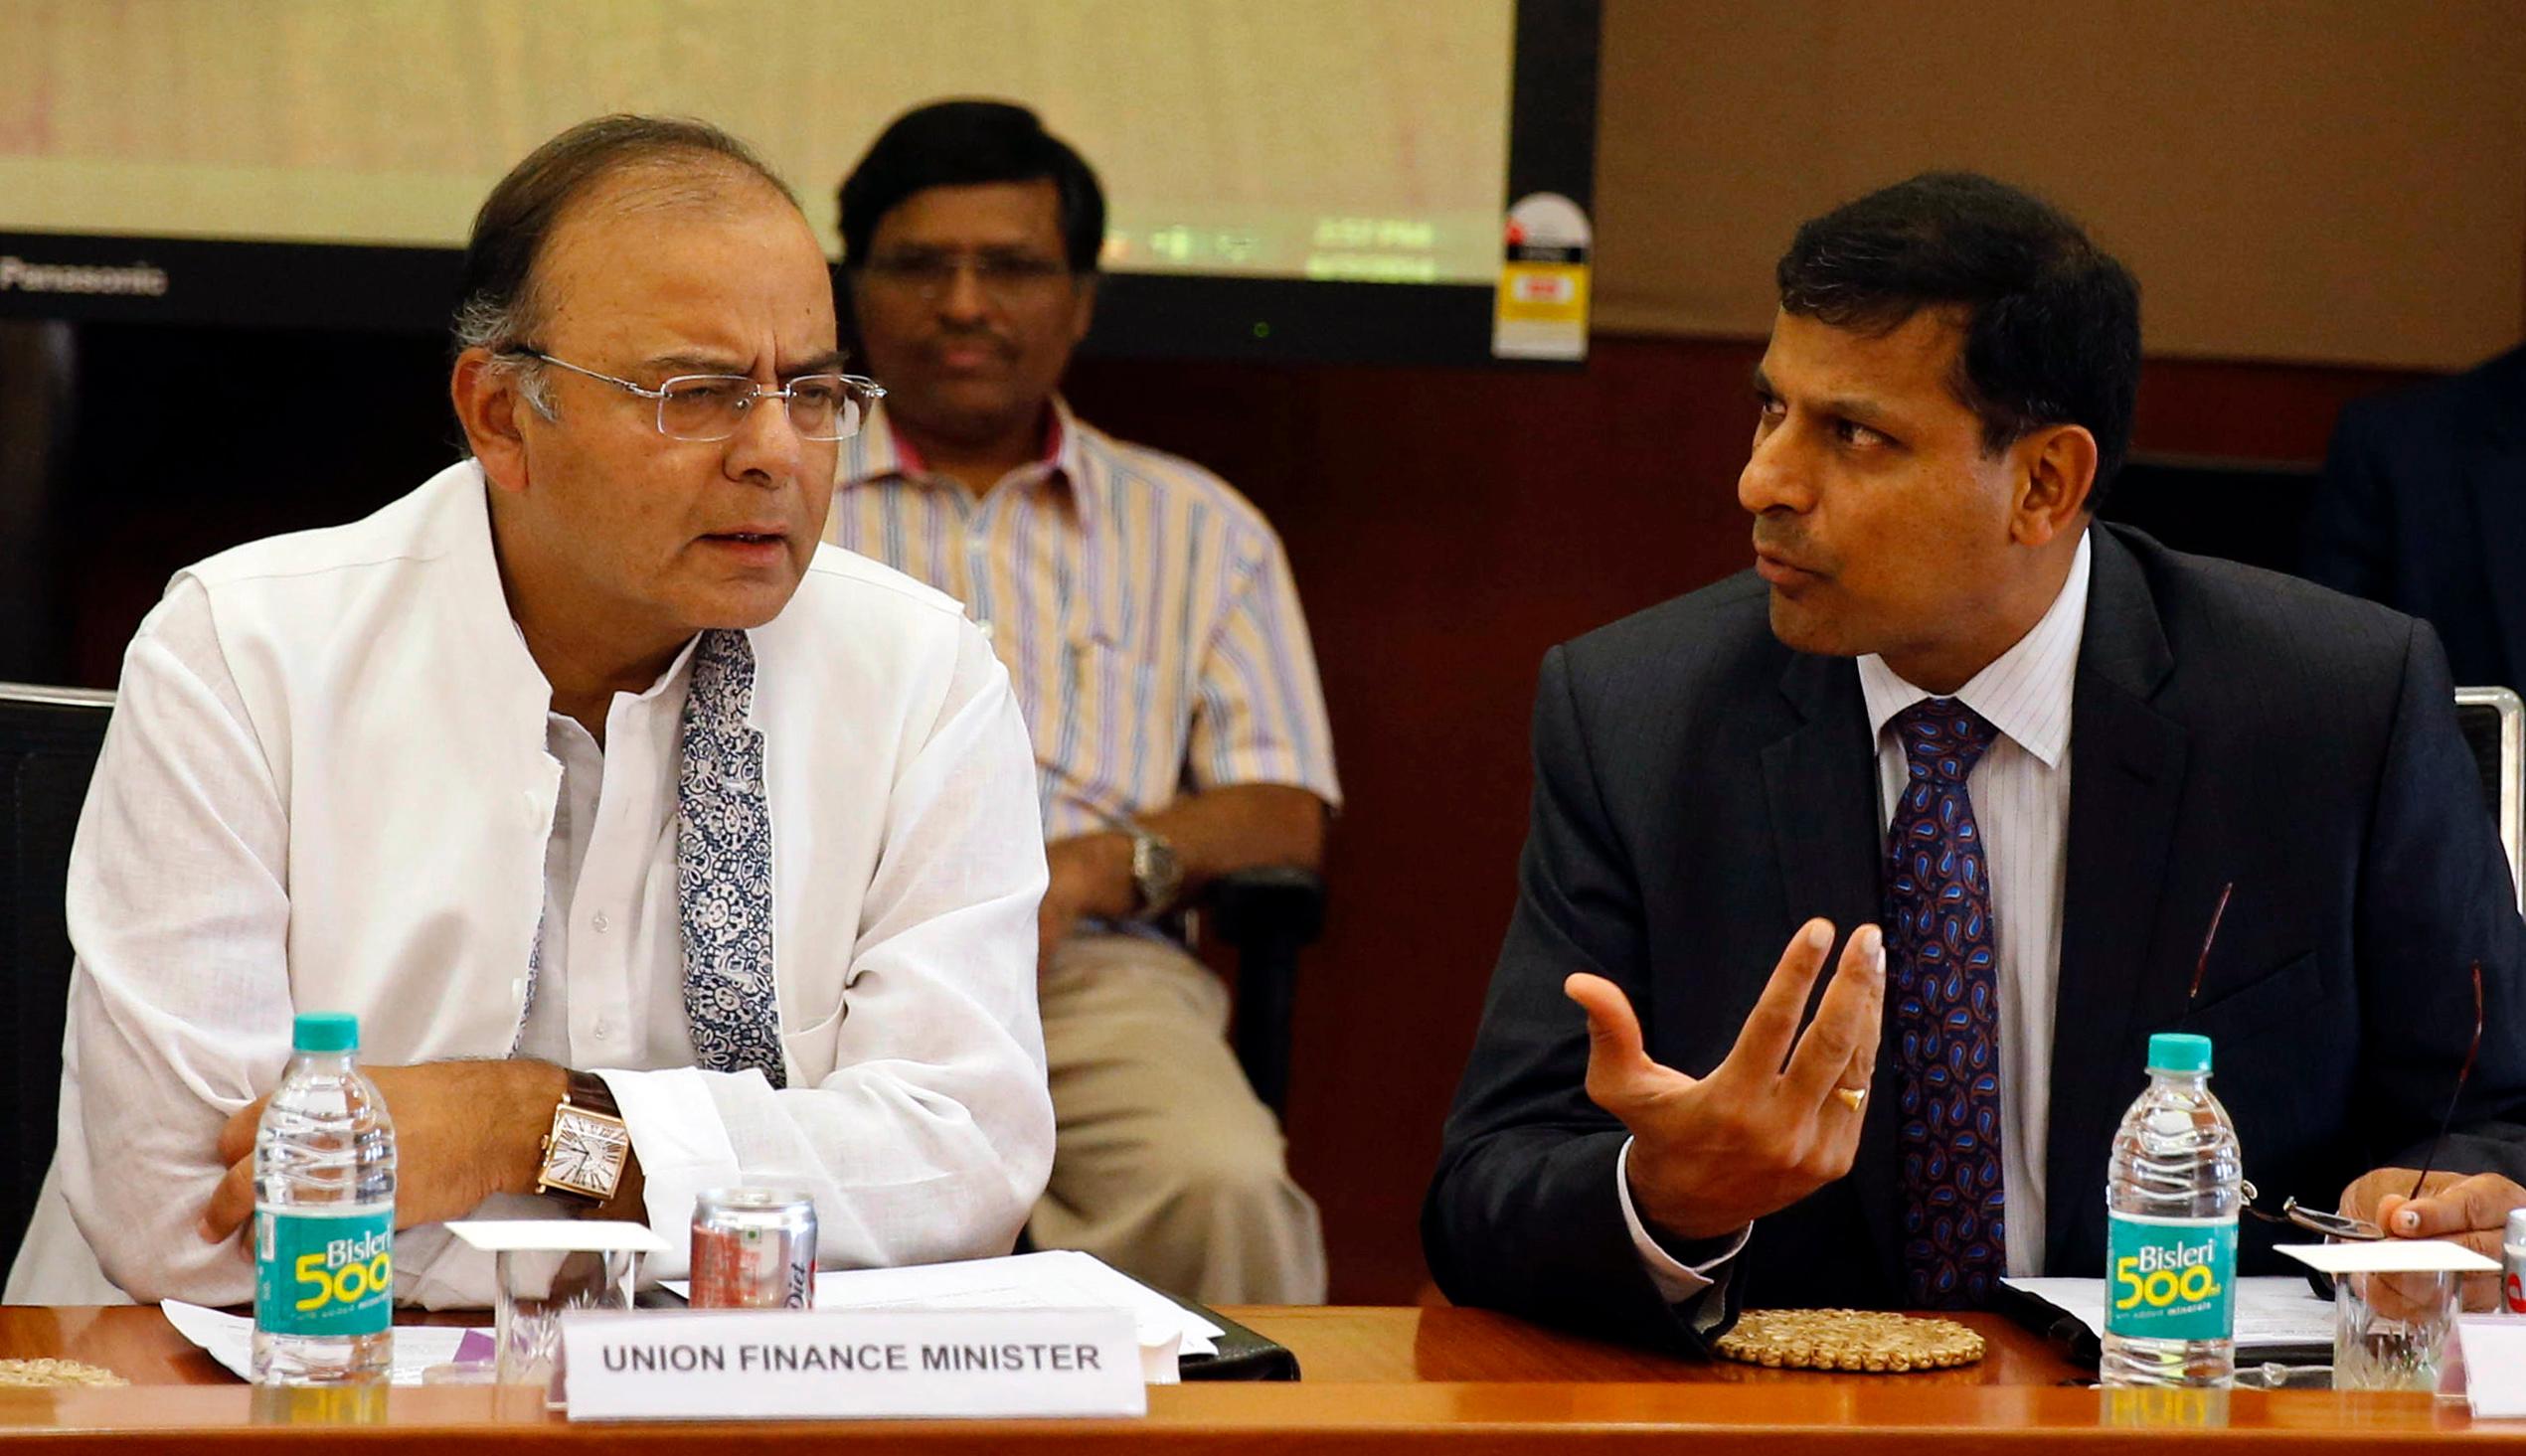 Govt to introduce monetary policy framework with focus on flexible inflation targeting